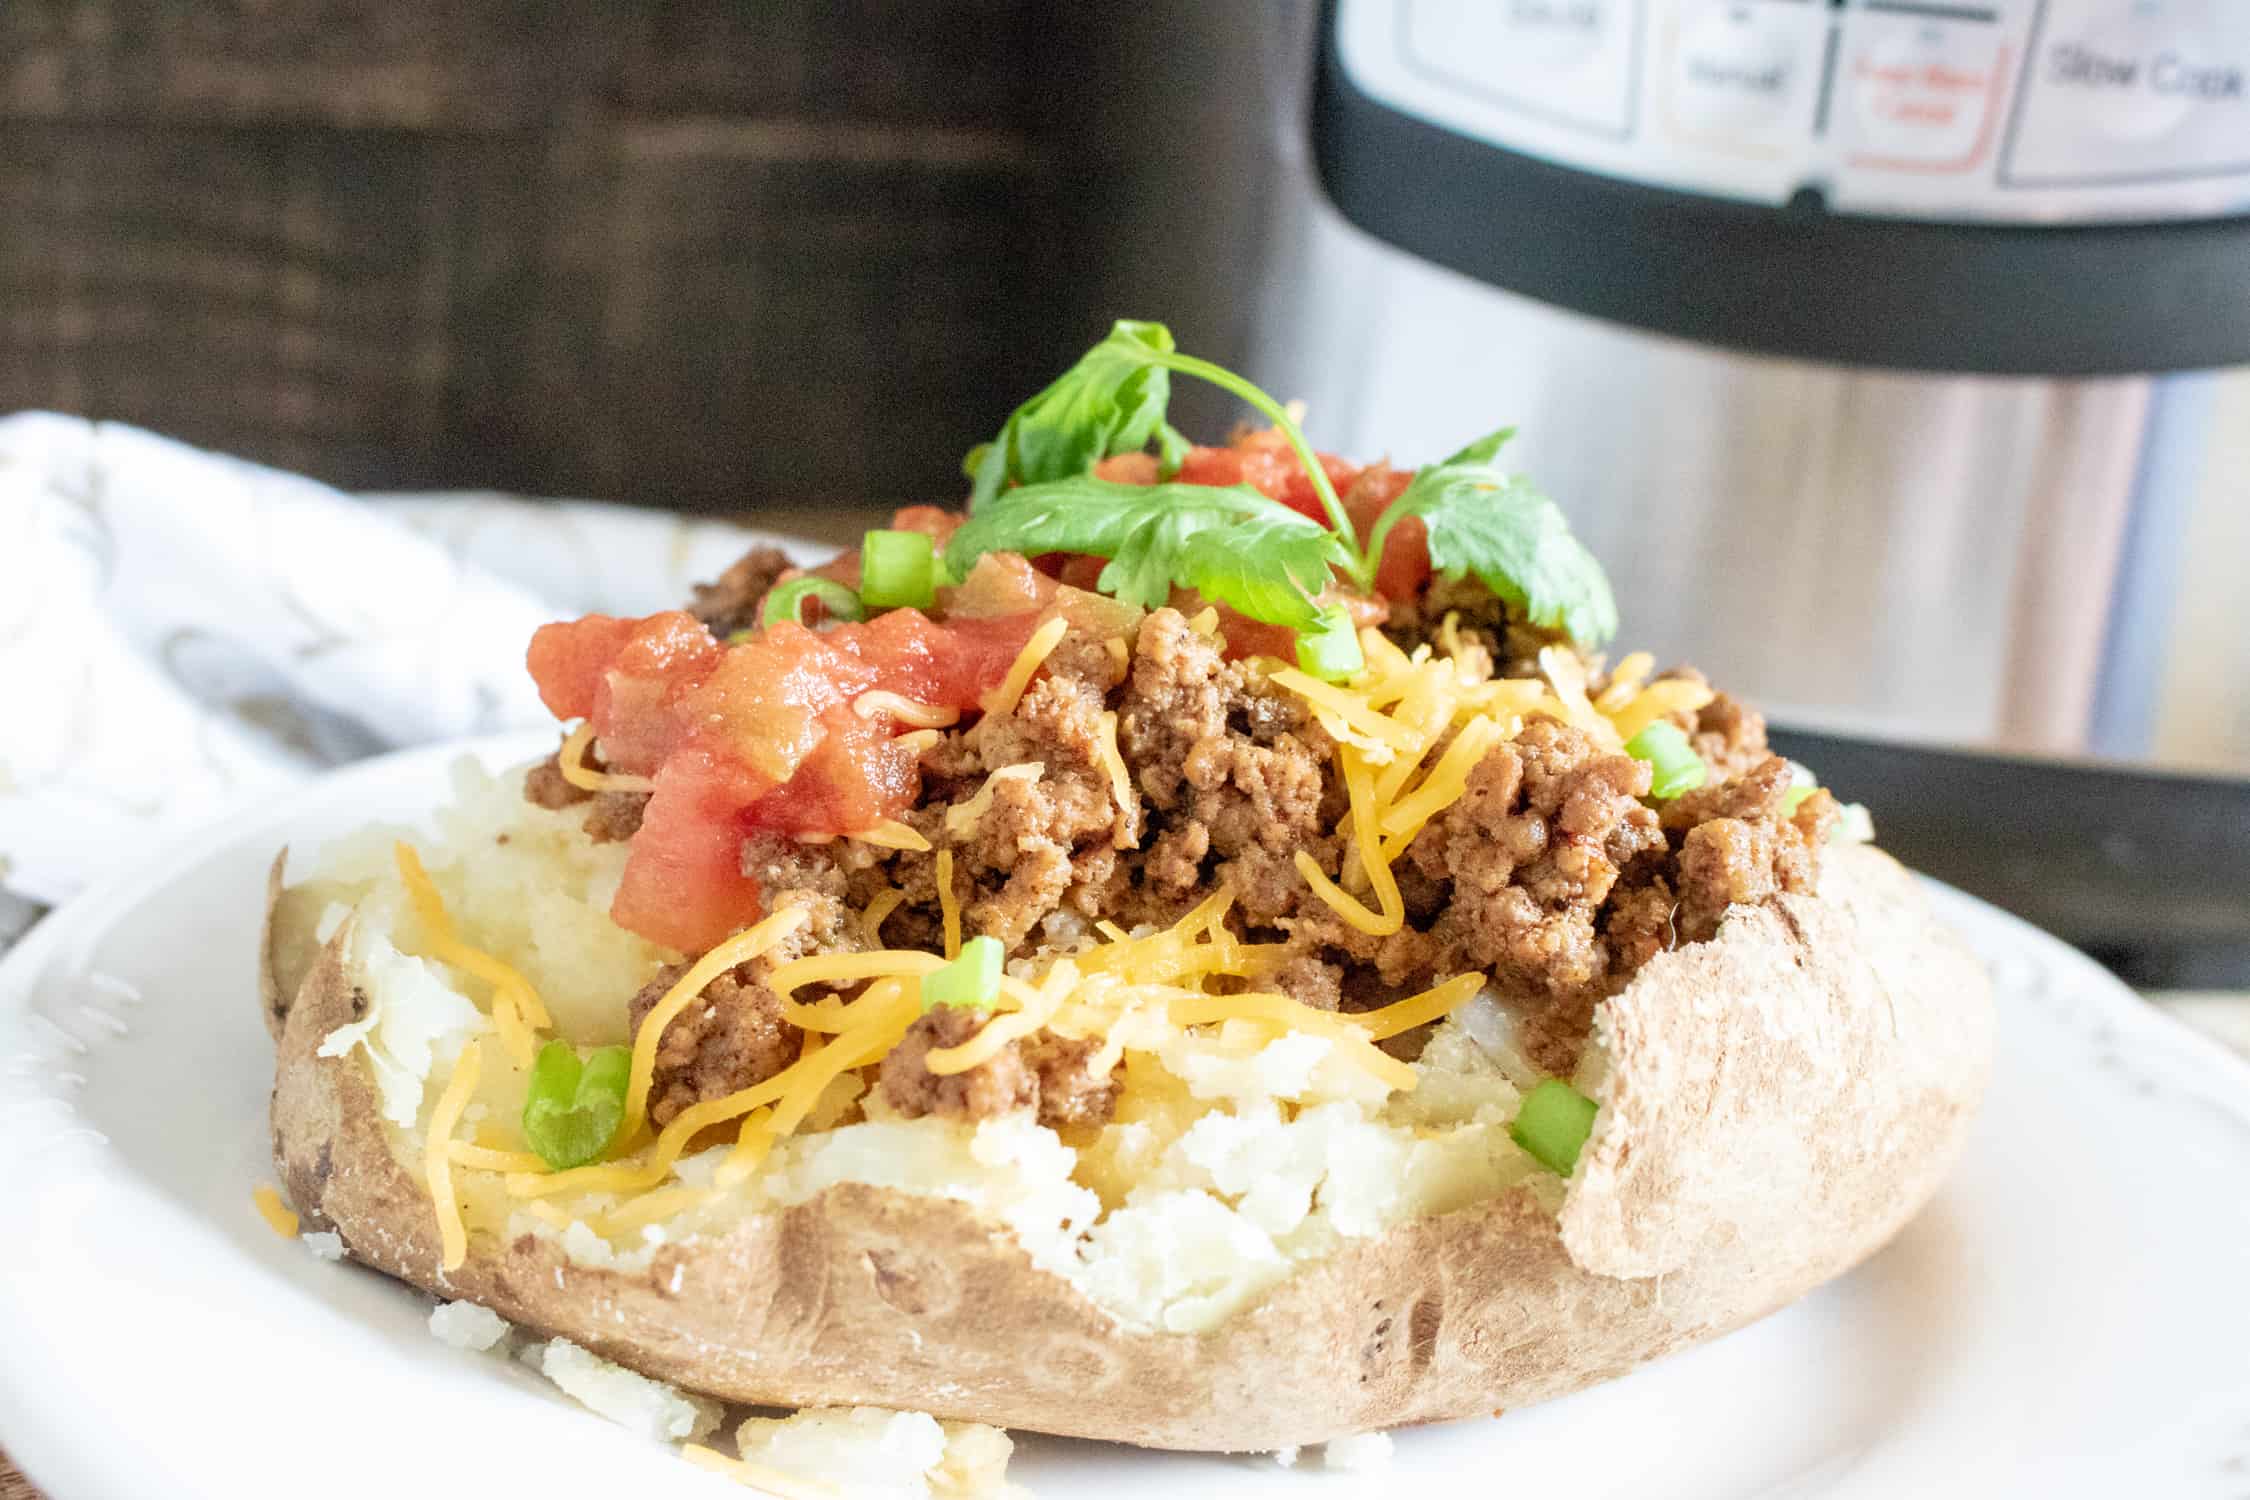 Instant Pot Taco Meat on a baked potato topped with cheese, cilantro and tomatoes 